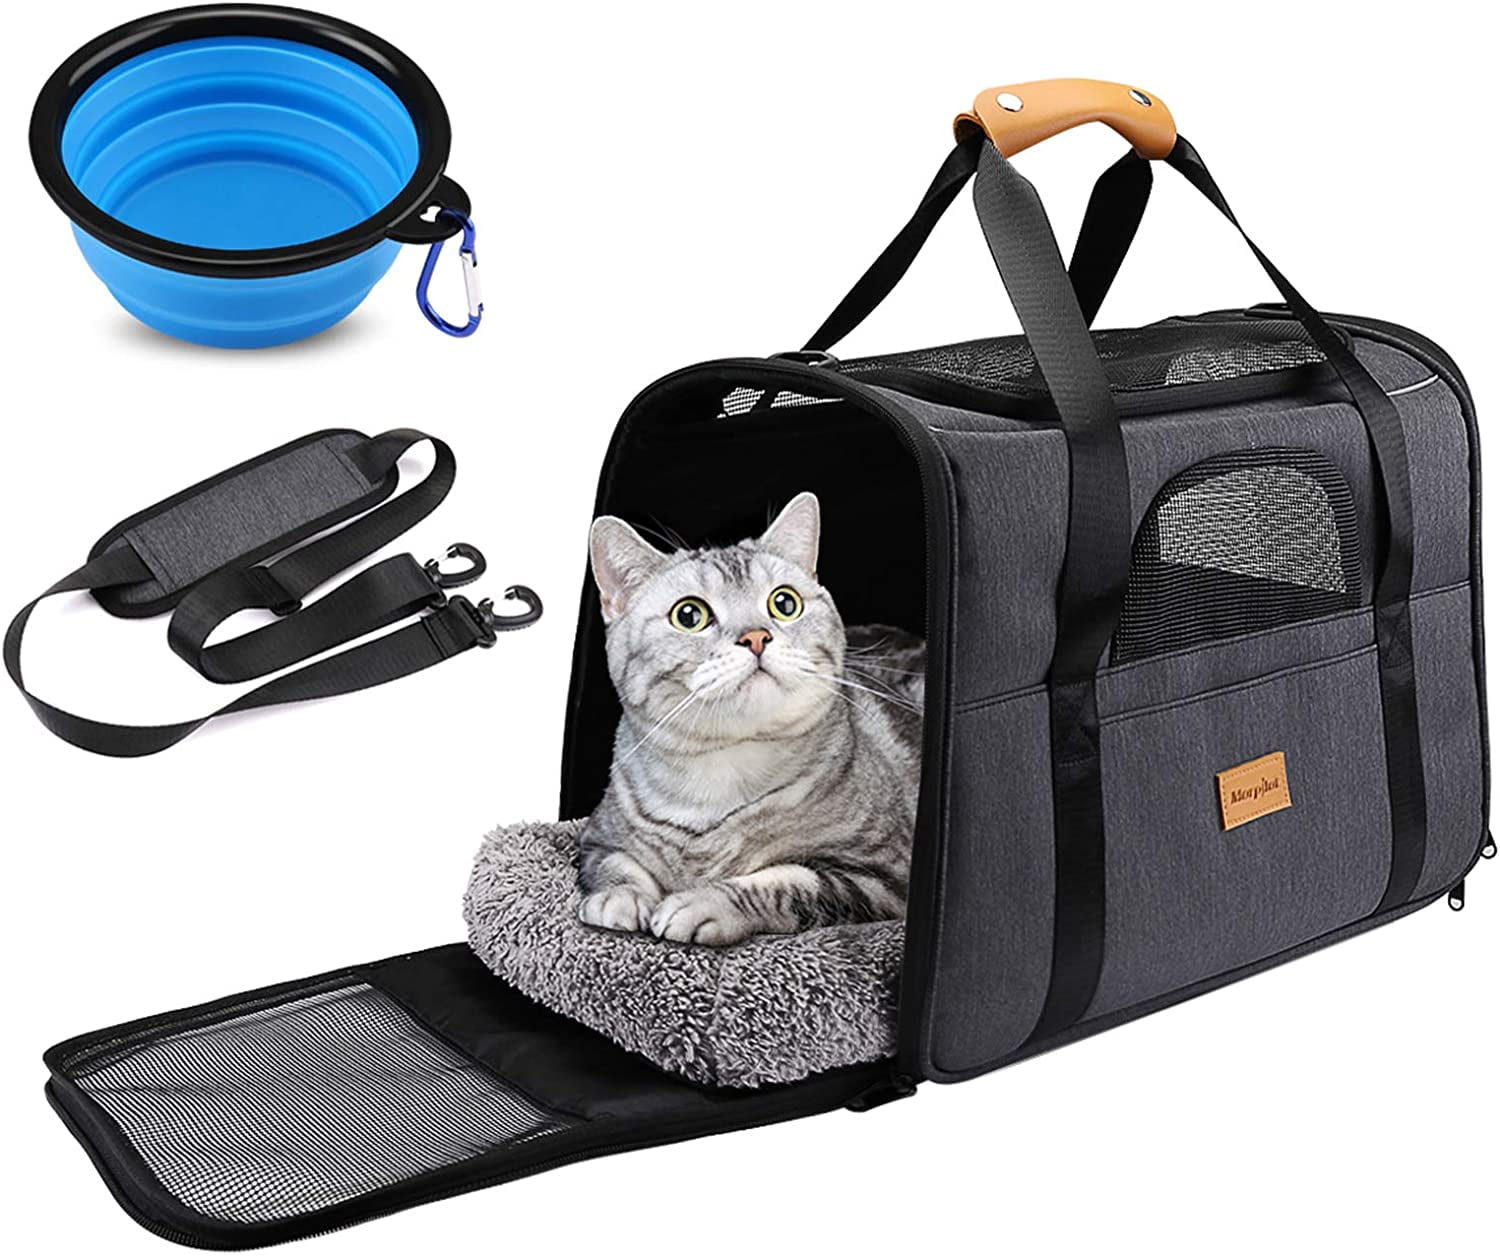 Pink Small Size MuchL Cat Carrier Airline Approved Pet Carrier Soft Sided Comfort Pet Travel Carrier for Kitty Cats Puppy Small Animals Portable Foldable Pet Travel Bag with 4-Windows Design 